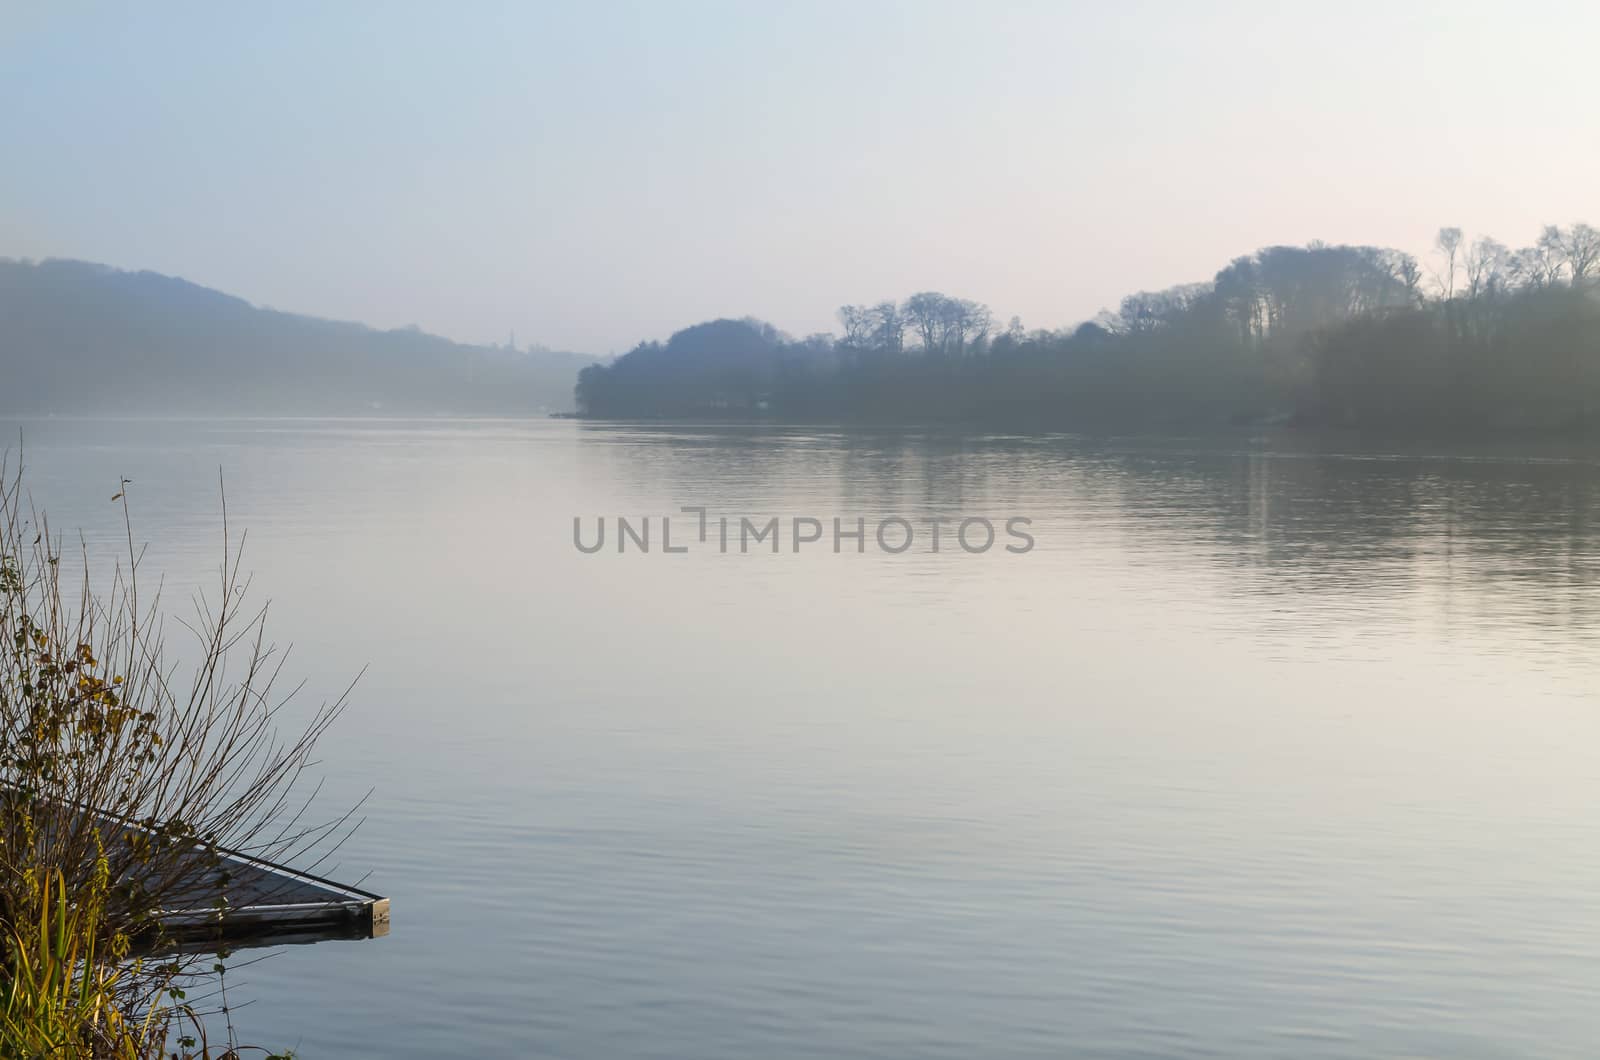 Baldeneysee in the morning mist by JFsPic